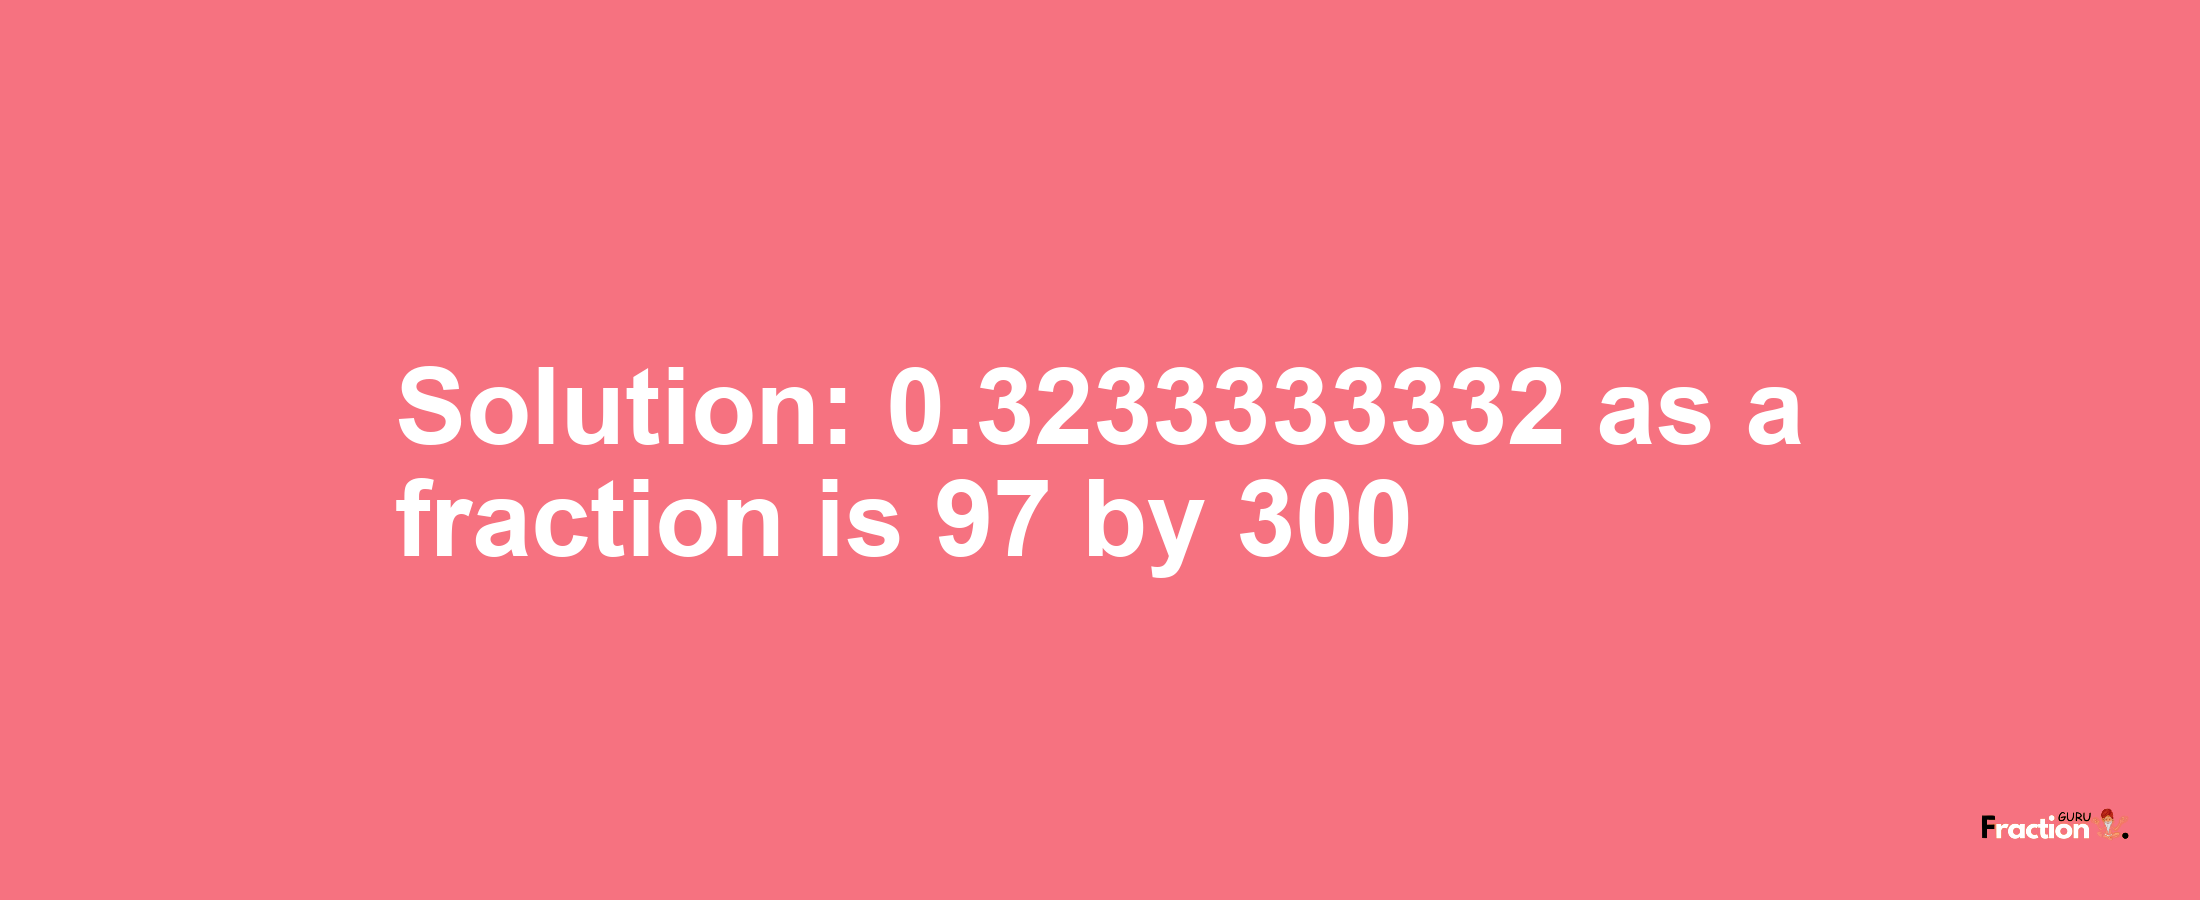 Solution:0.3233333332 as a fraction is 97/300